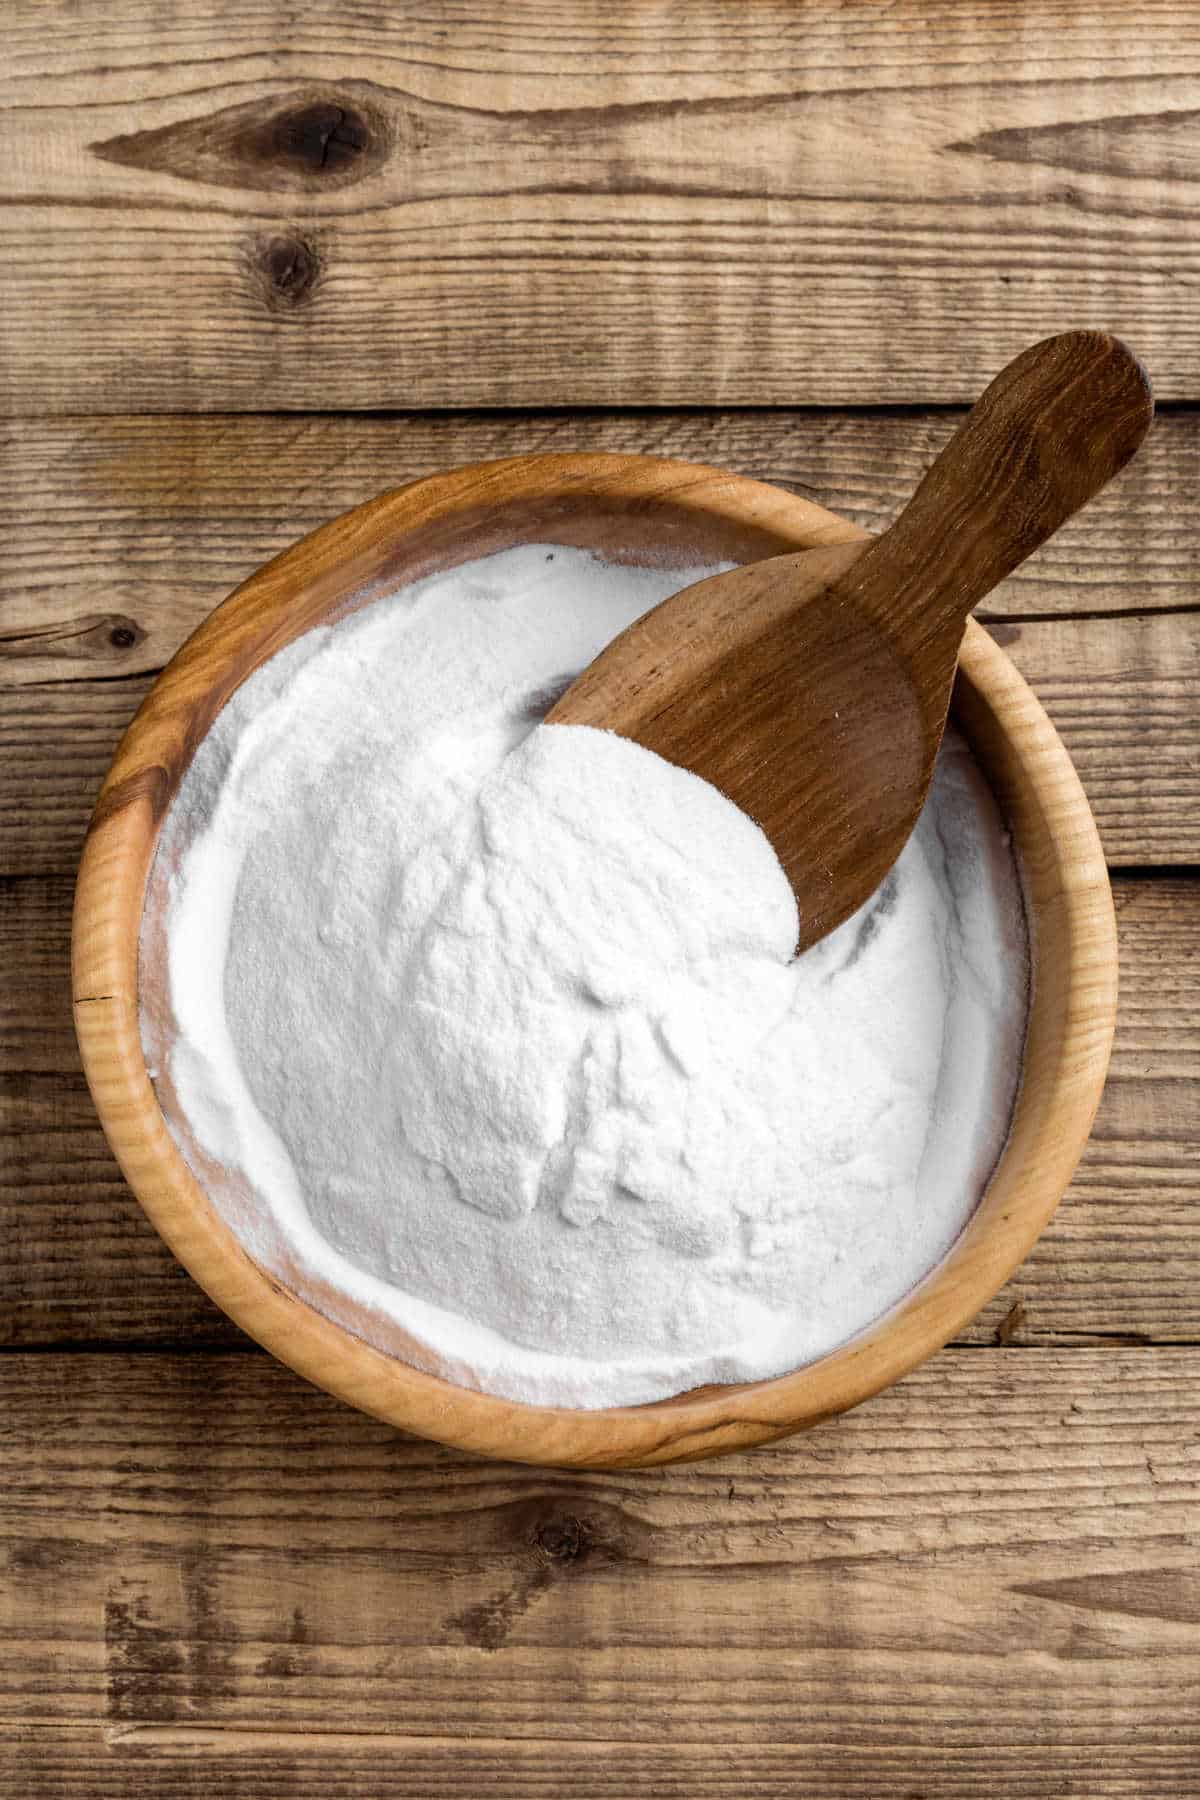 Is Baking Soda The Same As Bicarbonate of Soda?